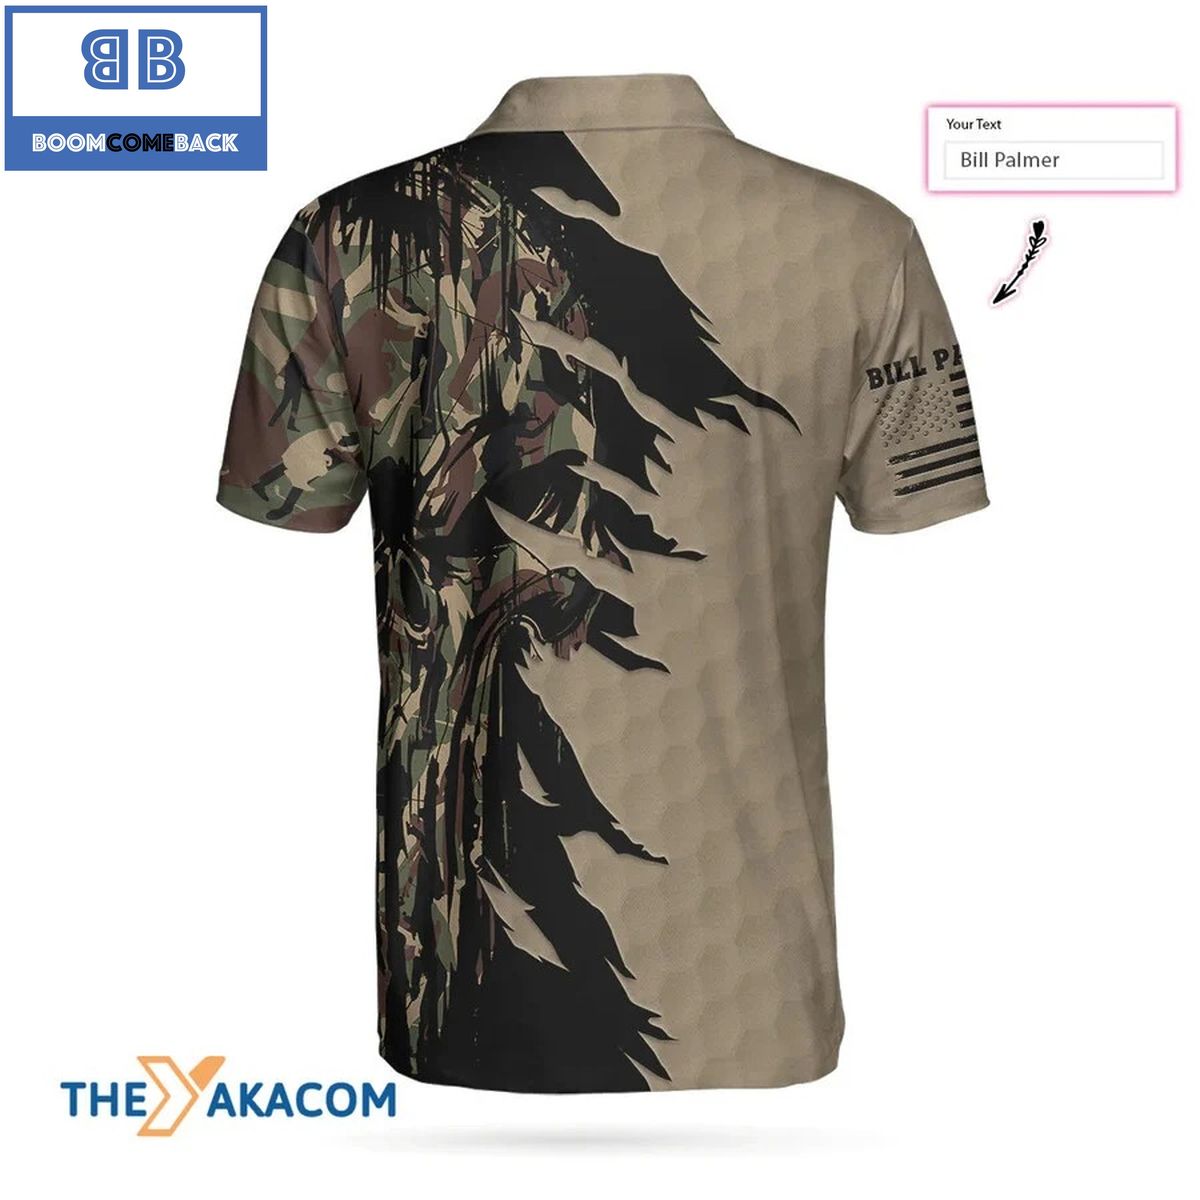 Personalized2BGolf2BRipped2BVintage2BGolfing2BClubs2BCamouflaged2BAthletic2BCollared2BMens2BPolo2BShirt2B2 PI8qK